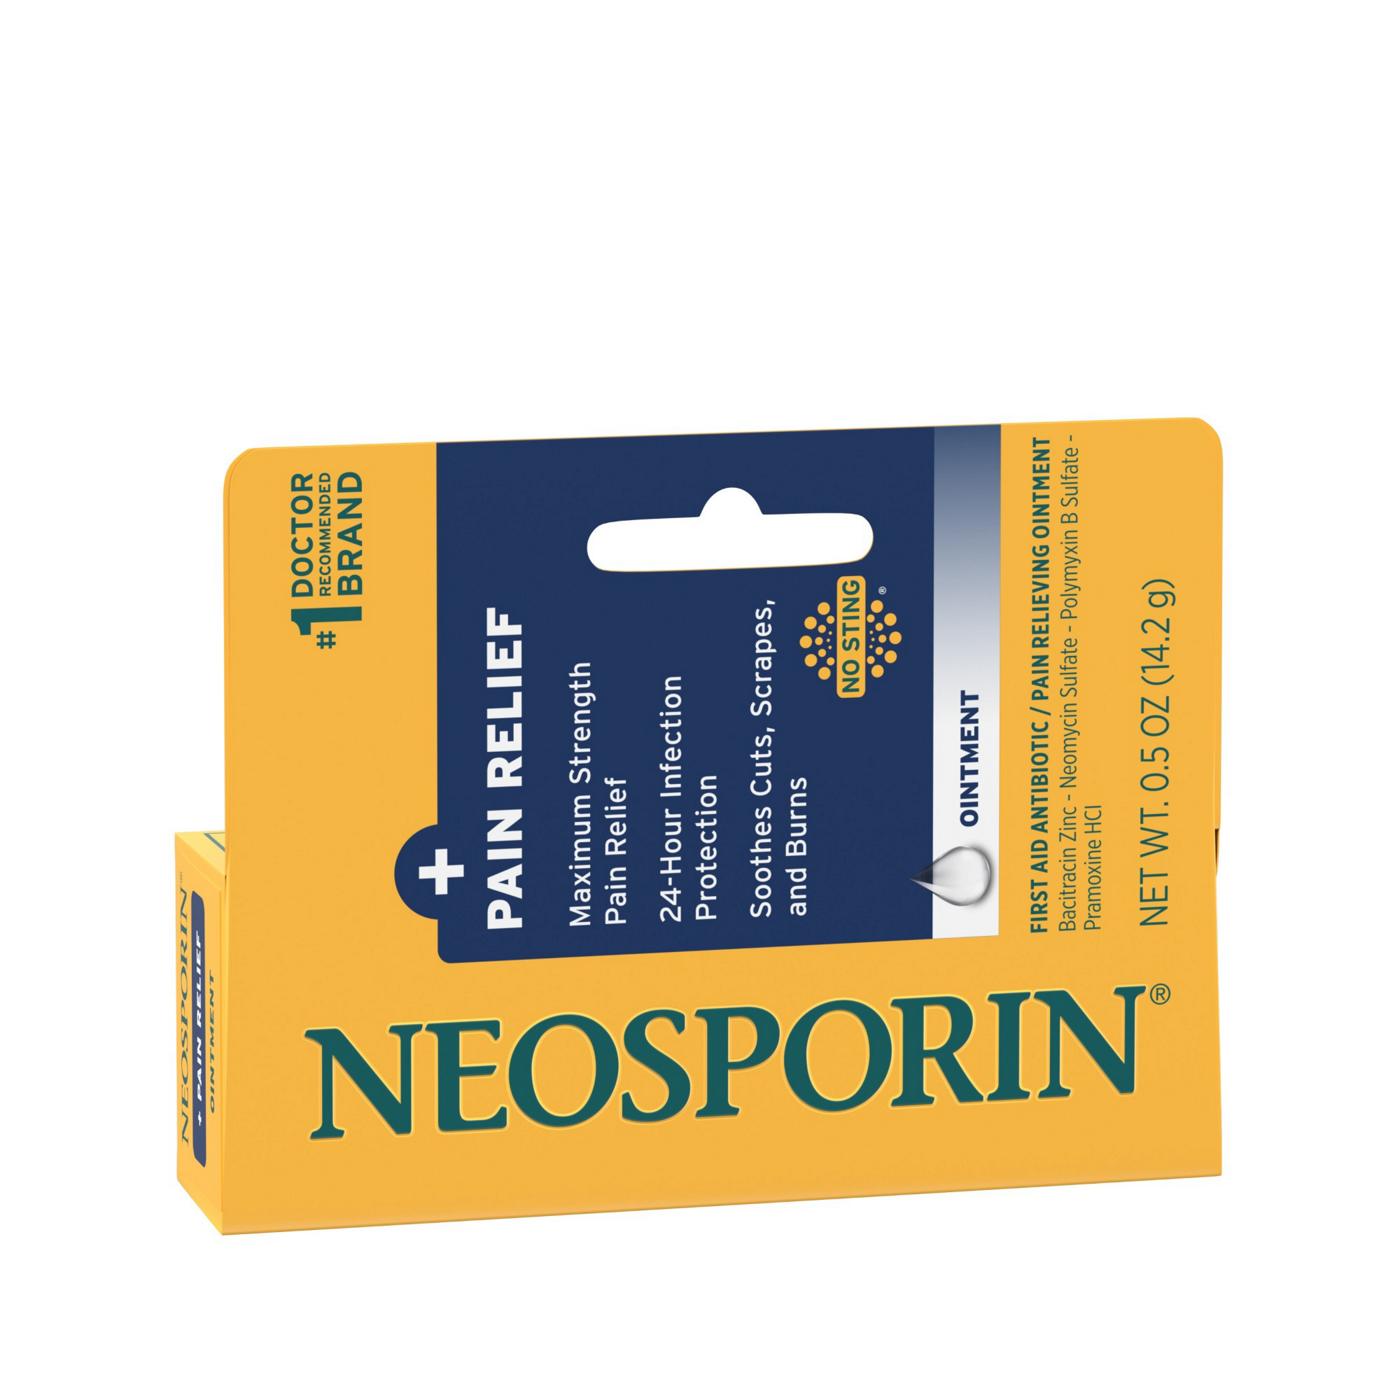 Neosporin + Pain Relief Ointment; image 6 of 7